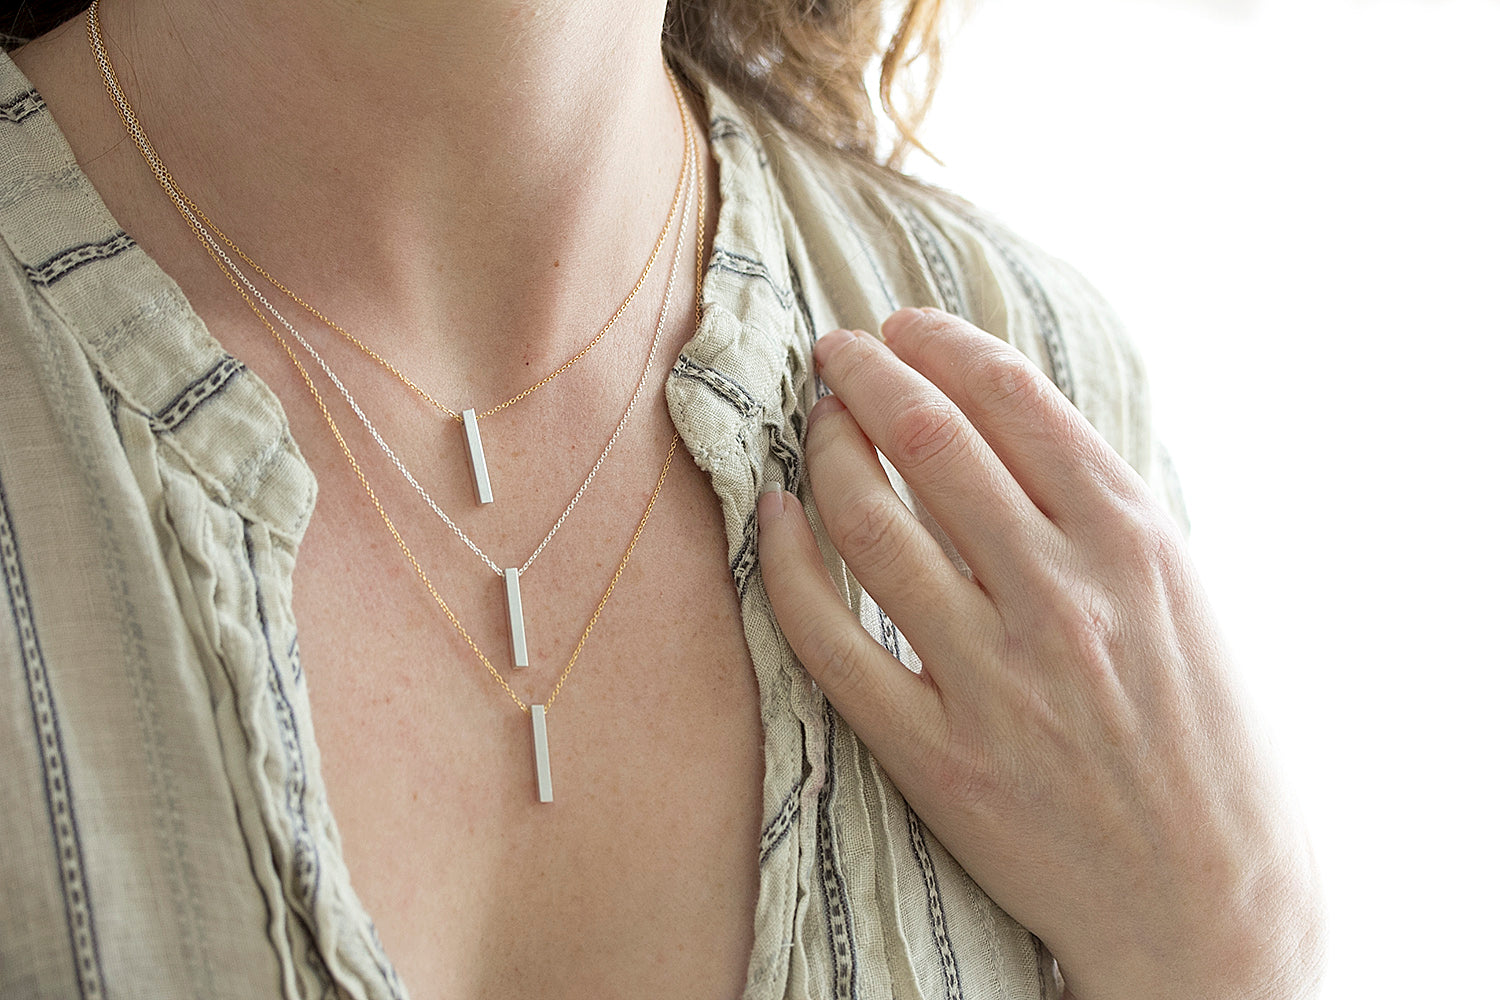 Choosing the Right Necklace Length For You - A Necklace Length Sizing Guide